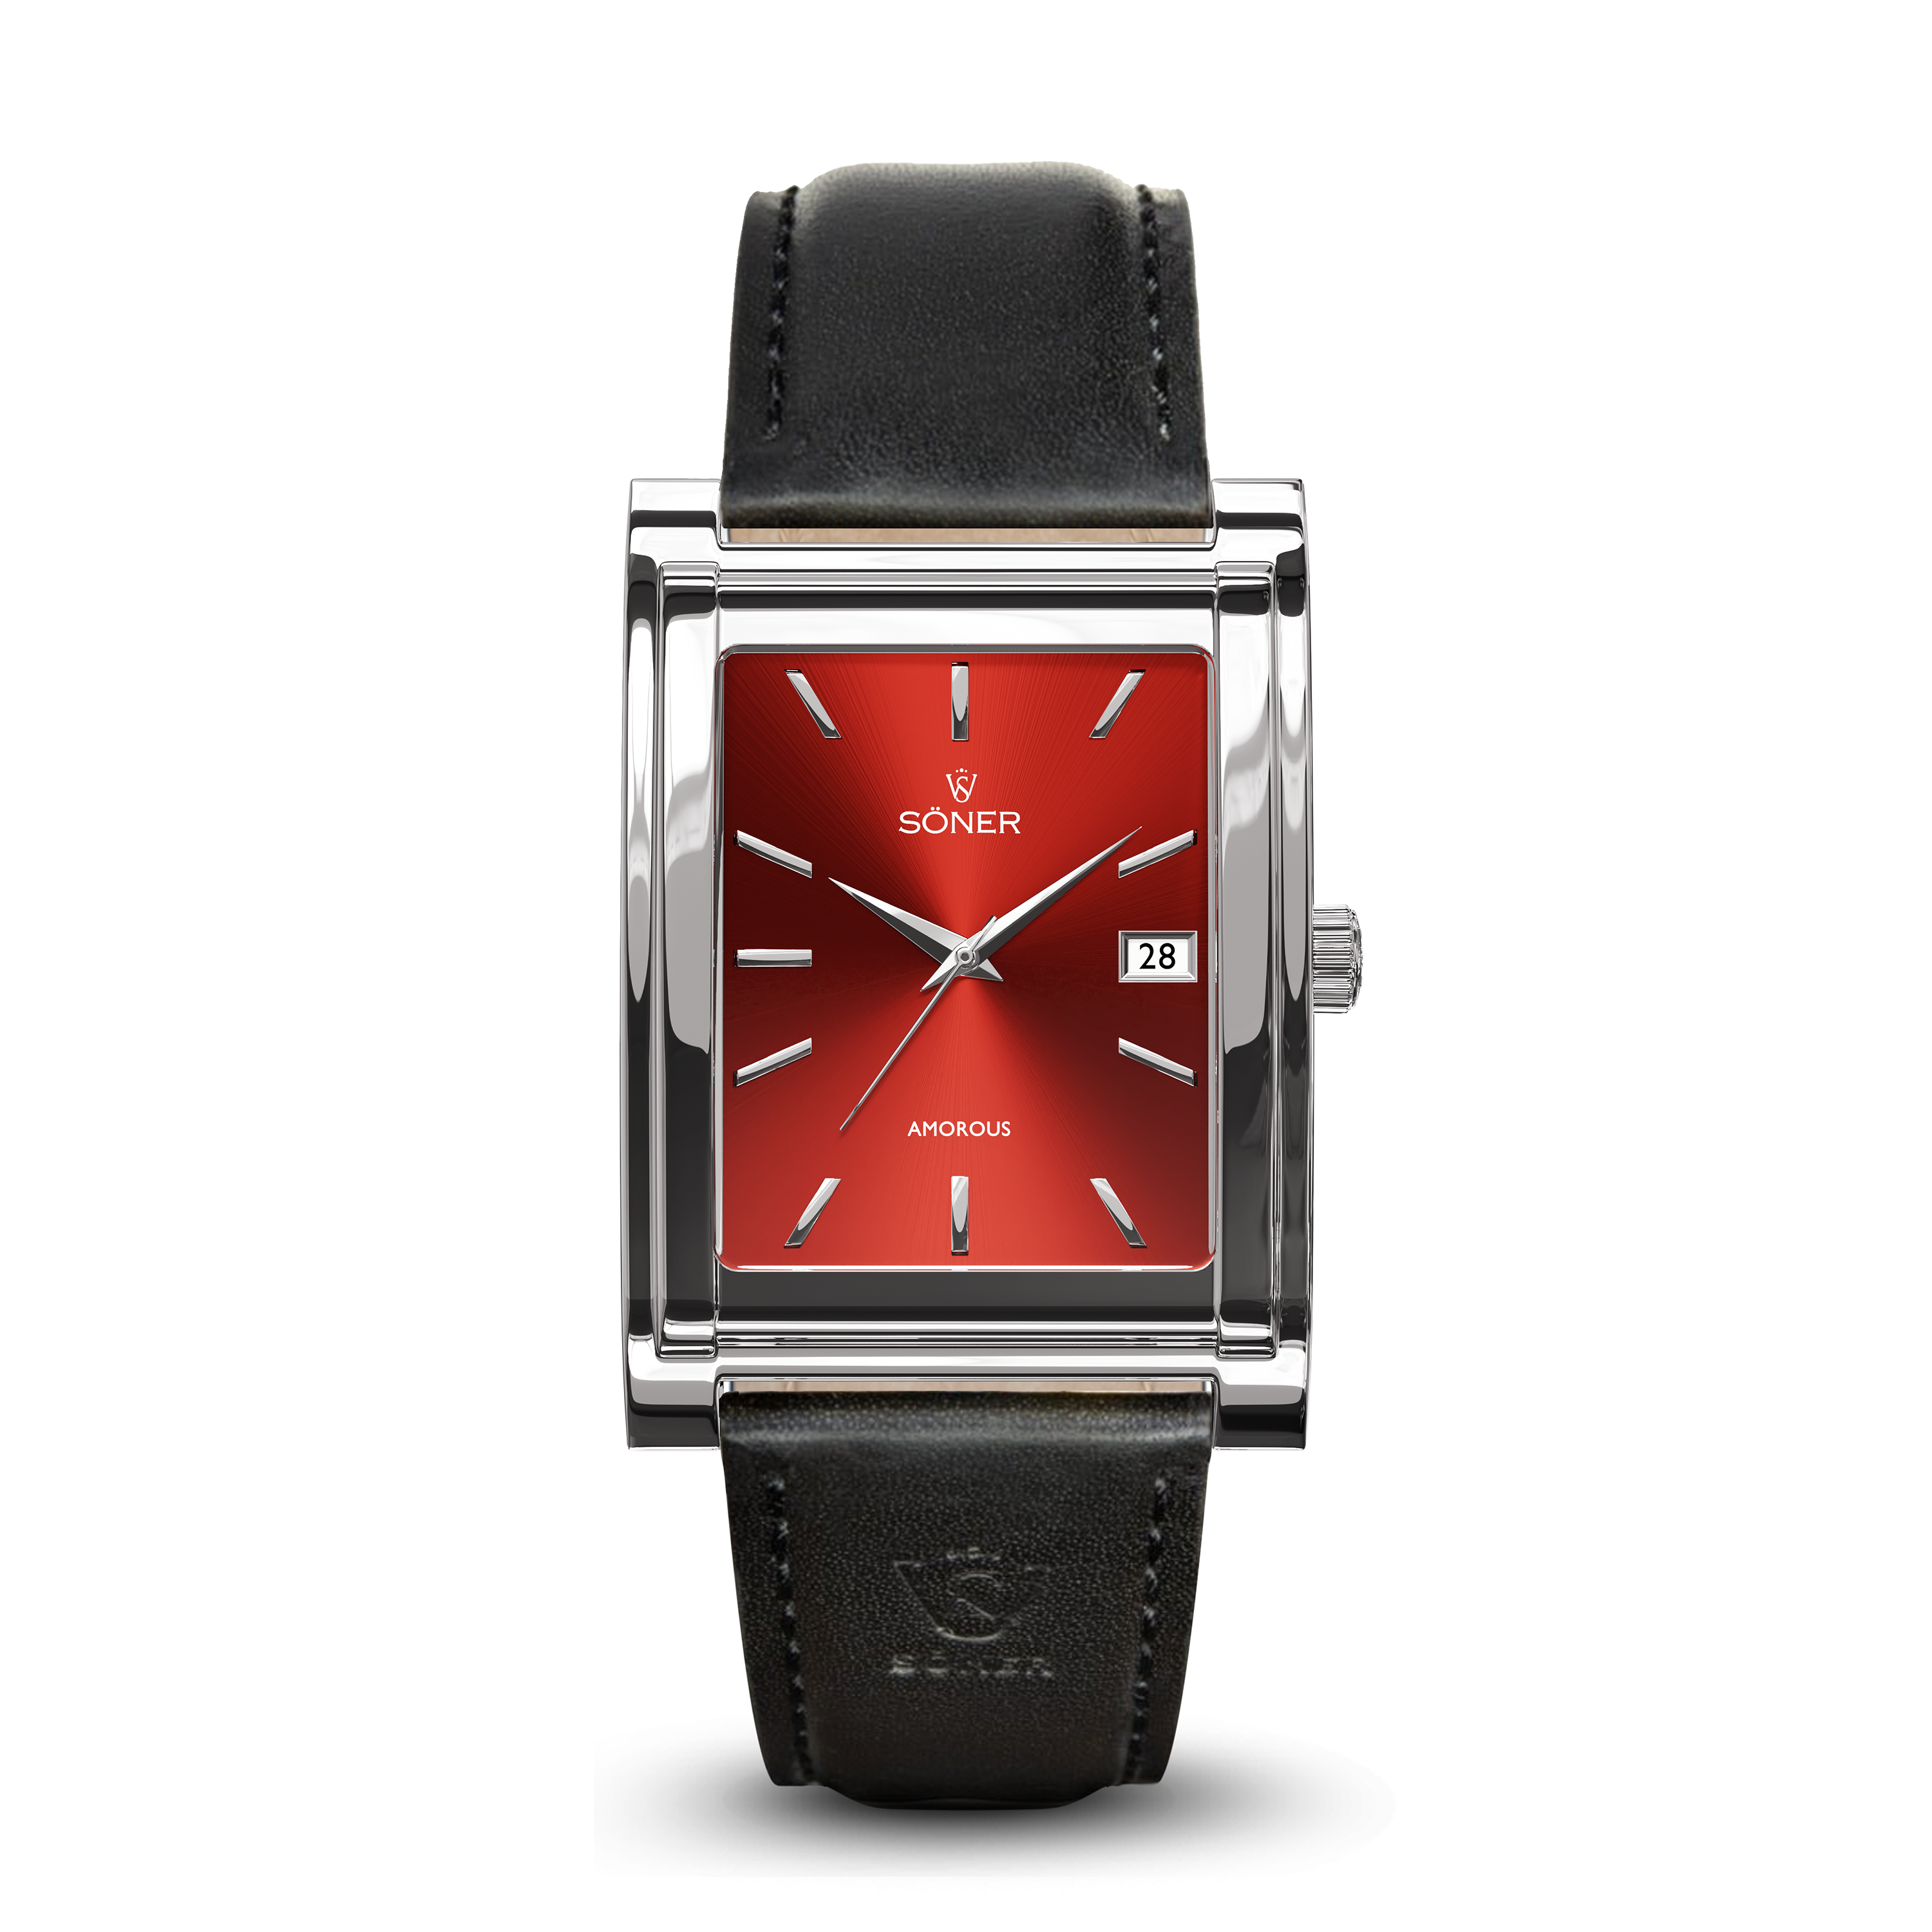 Square automatic watch, Amorous Rio with red dial - black leather strap front view